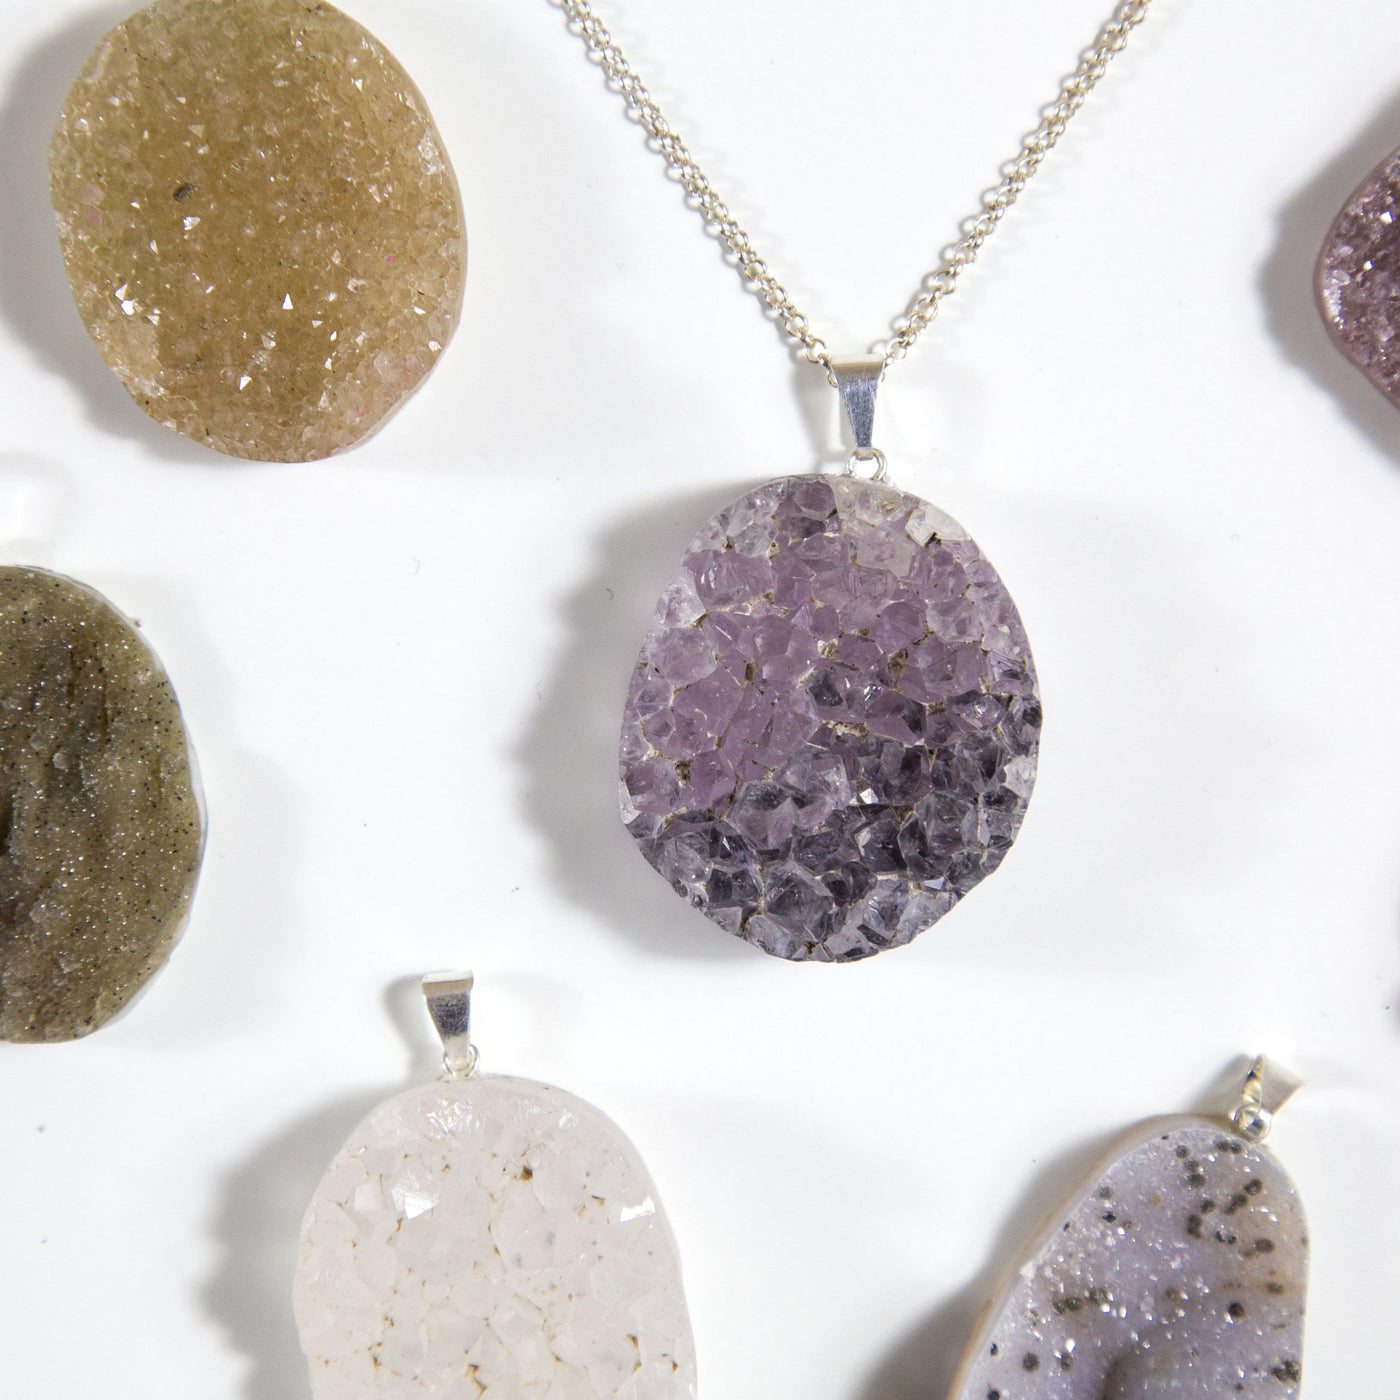 up close shot of druzy cabochon pendant on necklace chain